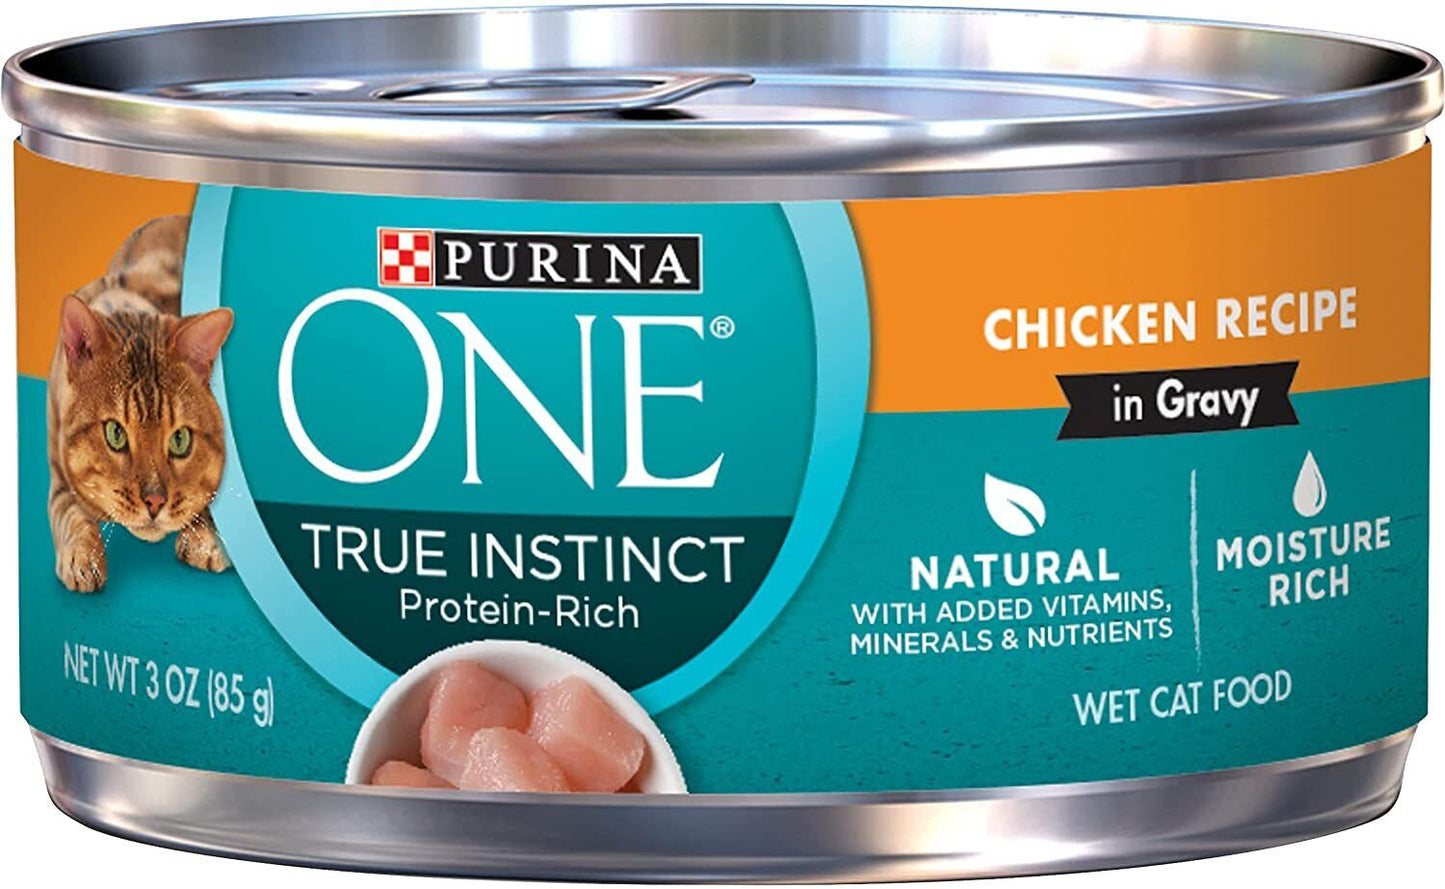 Purina One True Instinct Natural Wet Cat Food In Sauce or Gravy, 3 oz, 24 Cans